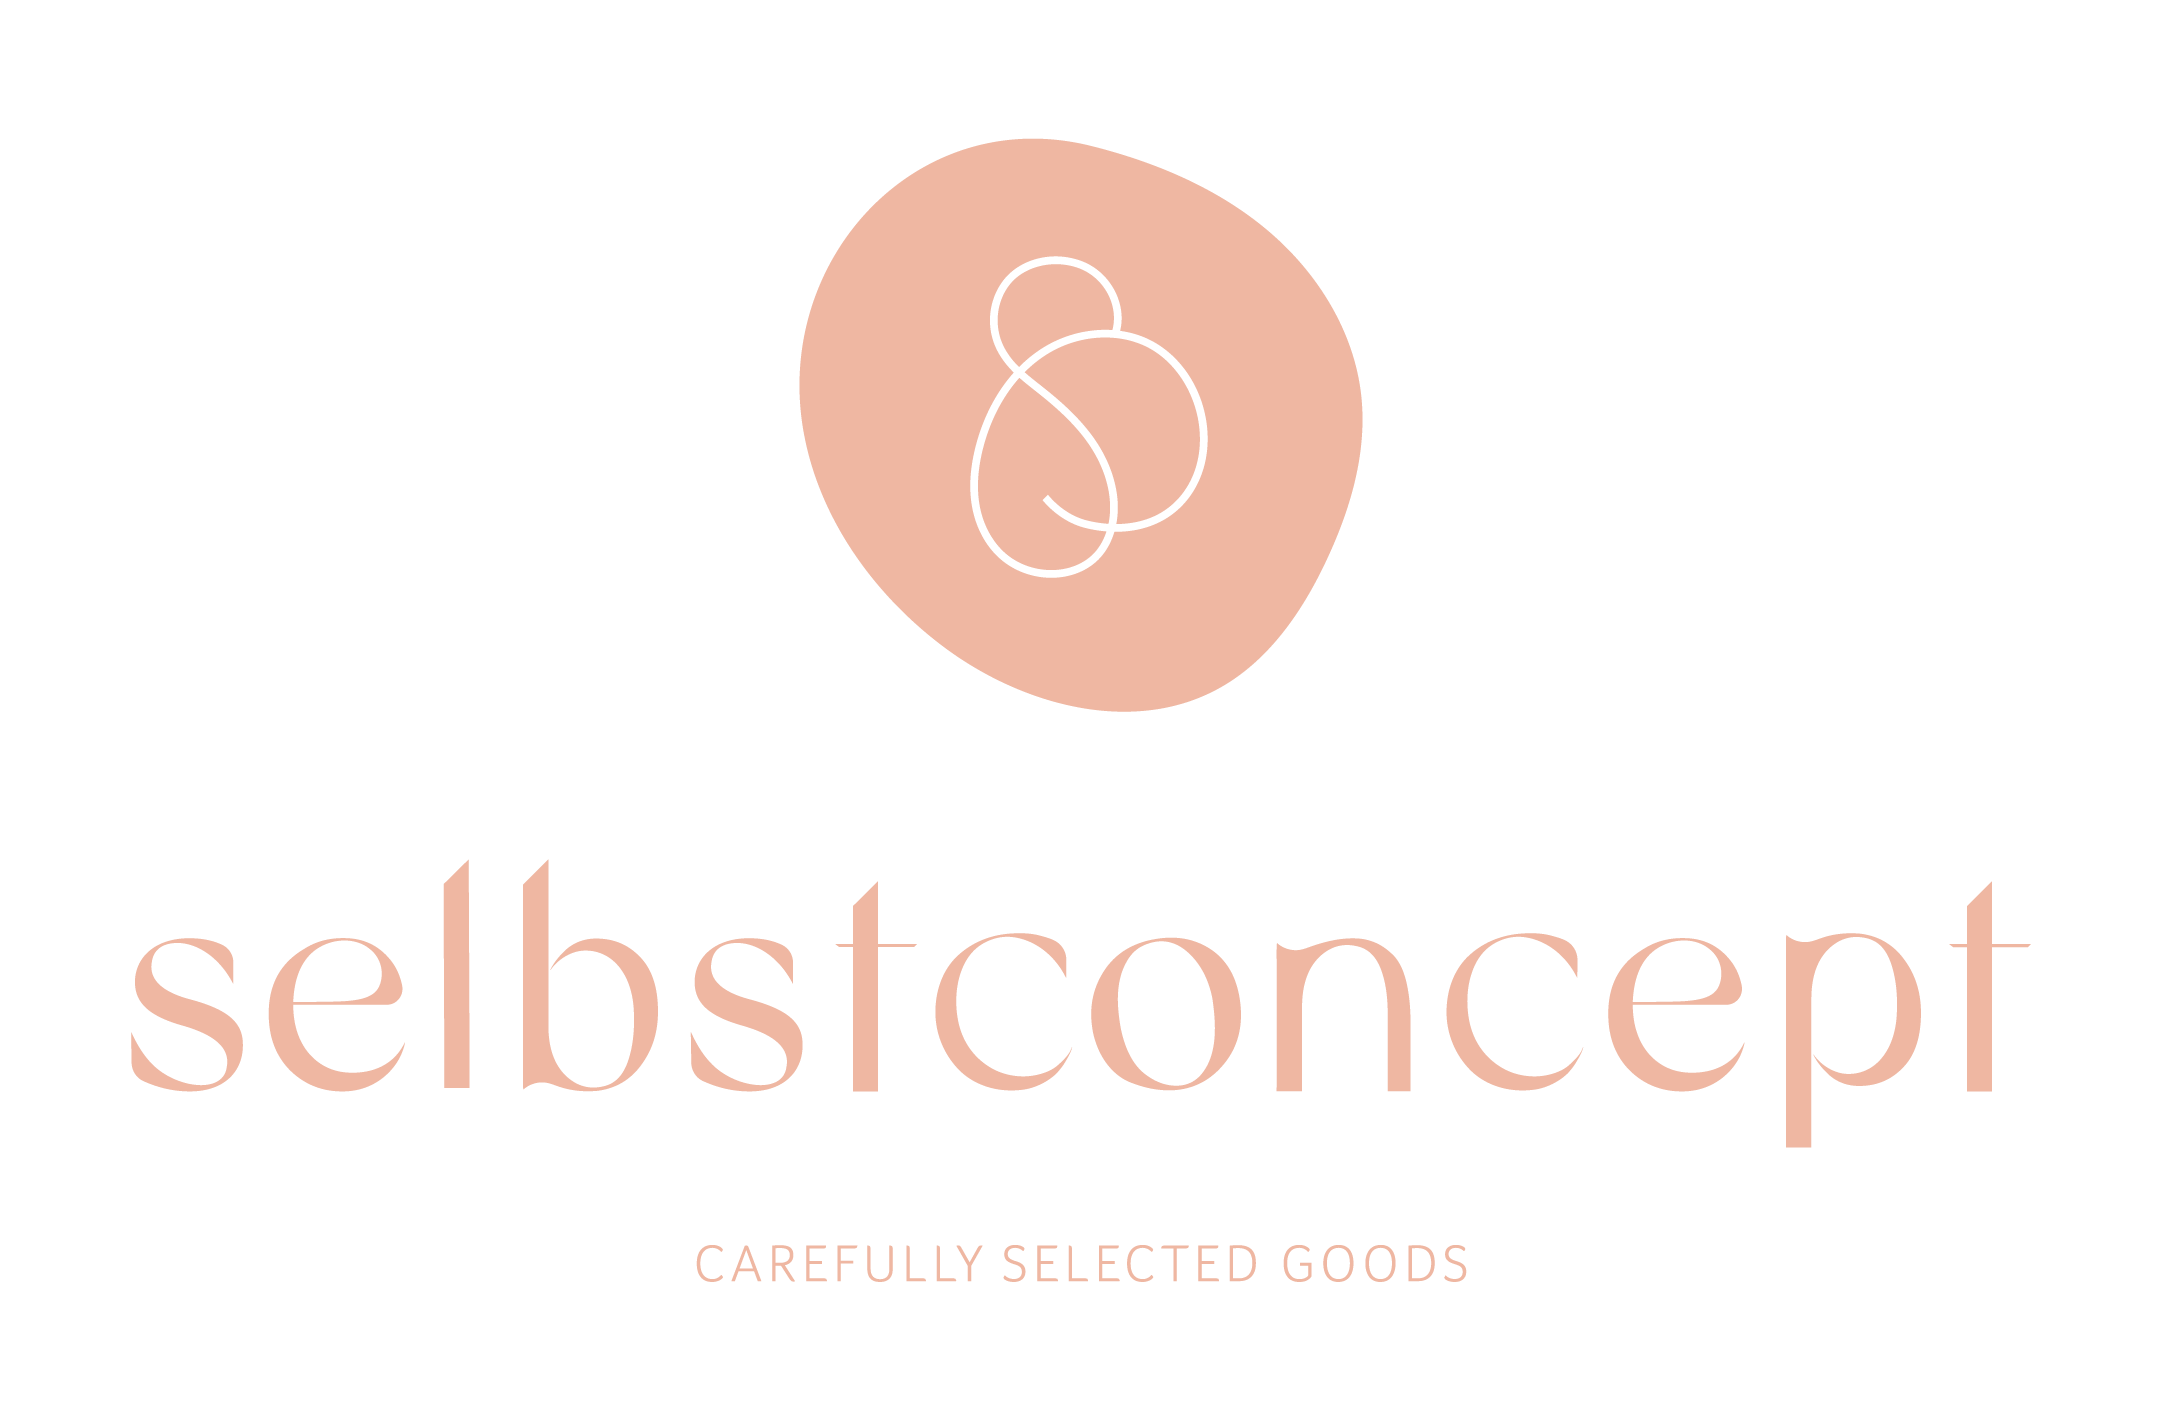 selbstconcept - carefully selected goods